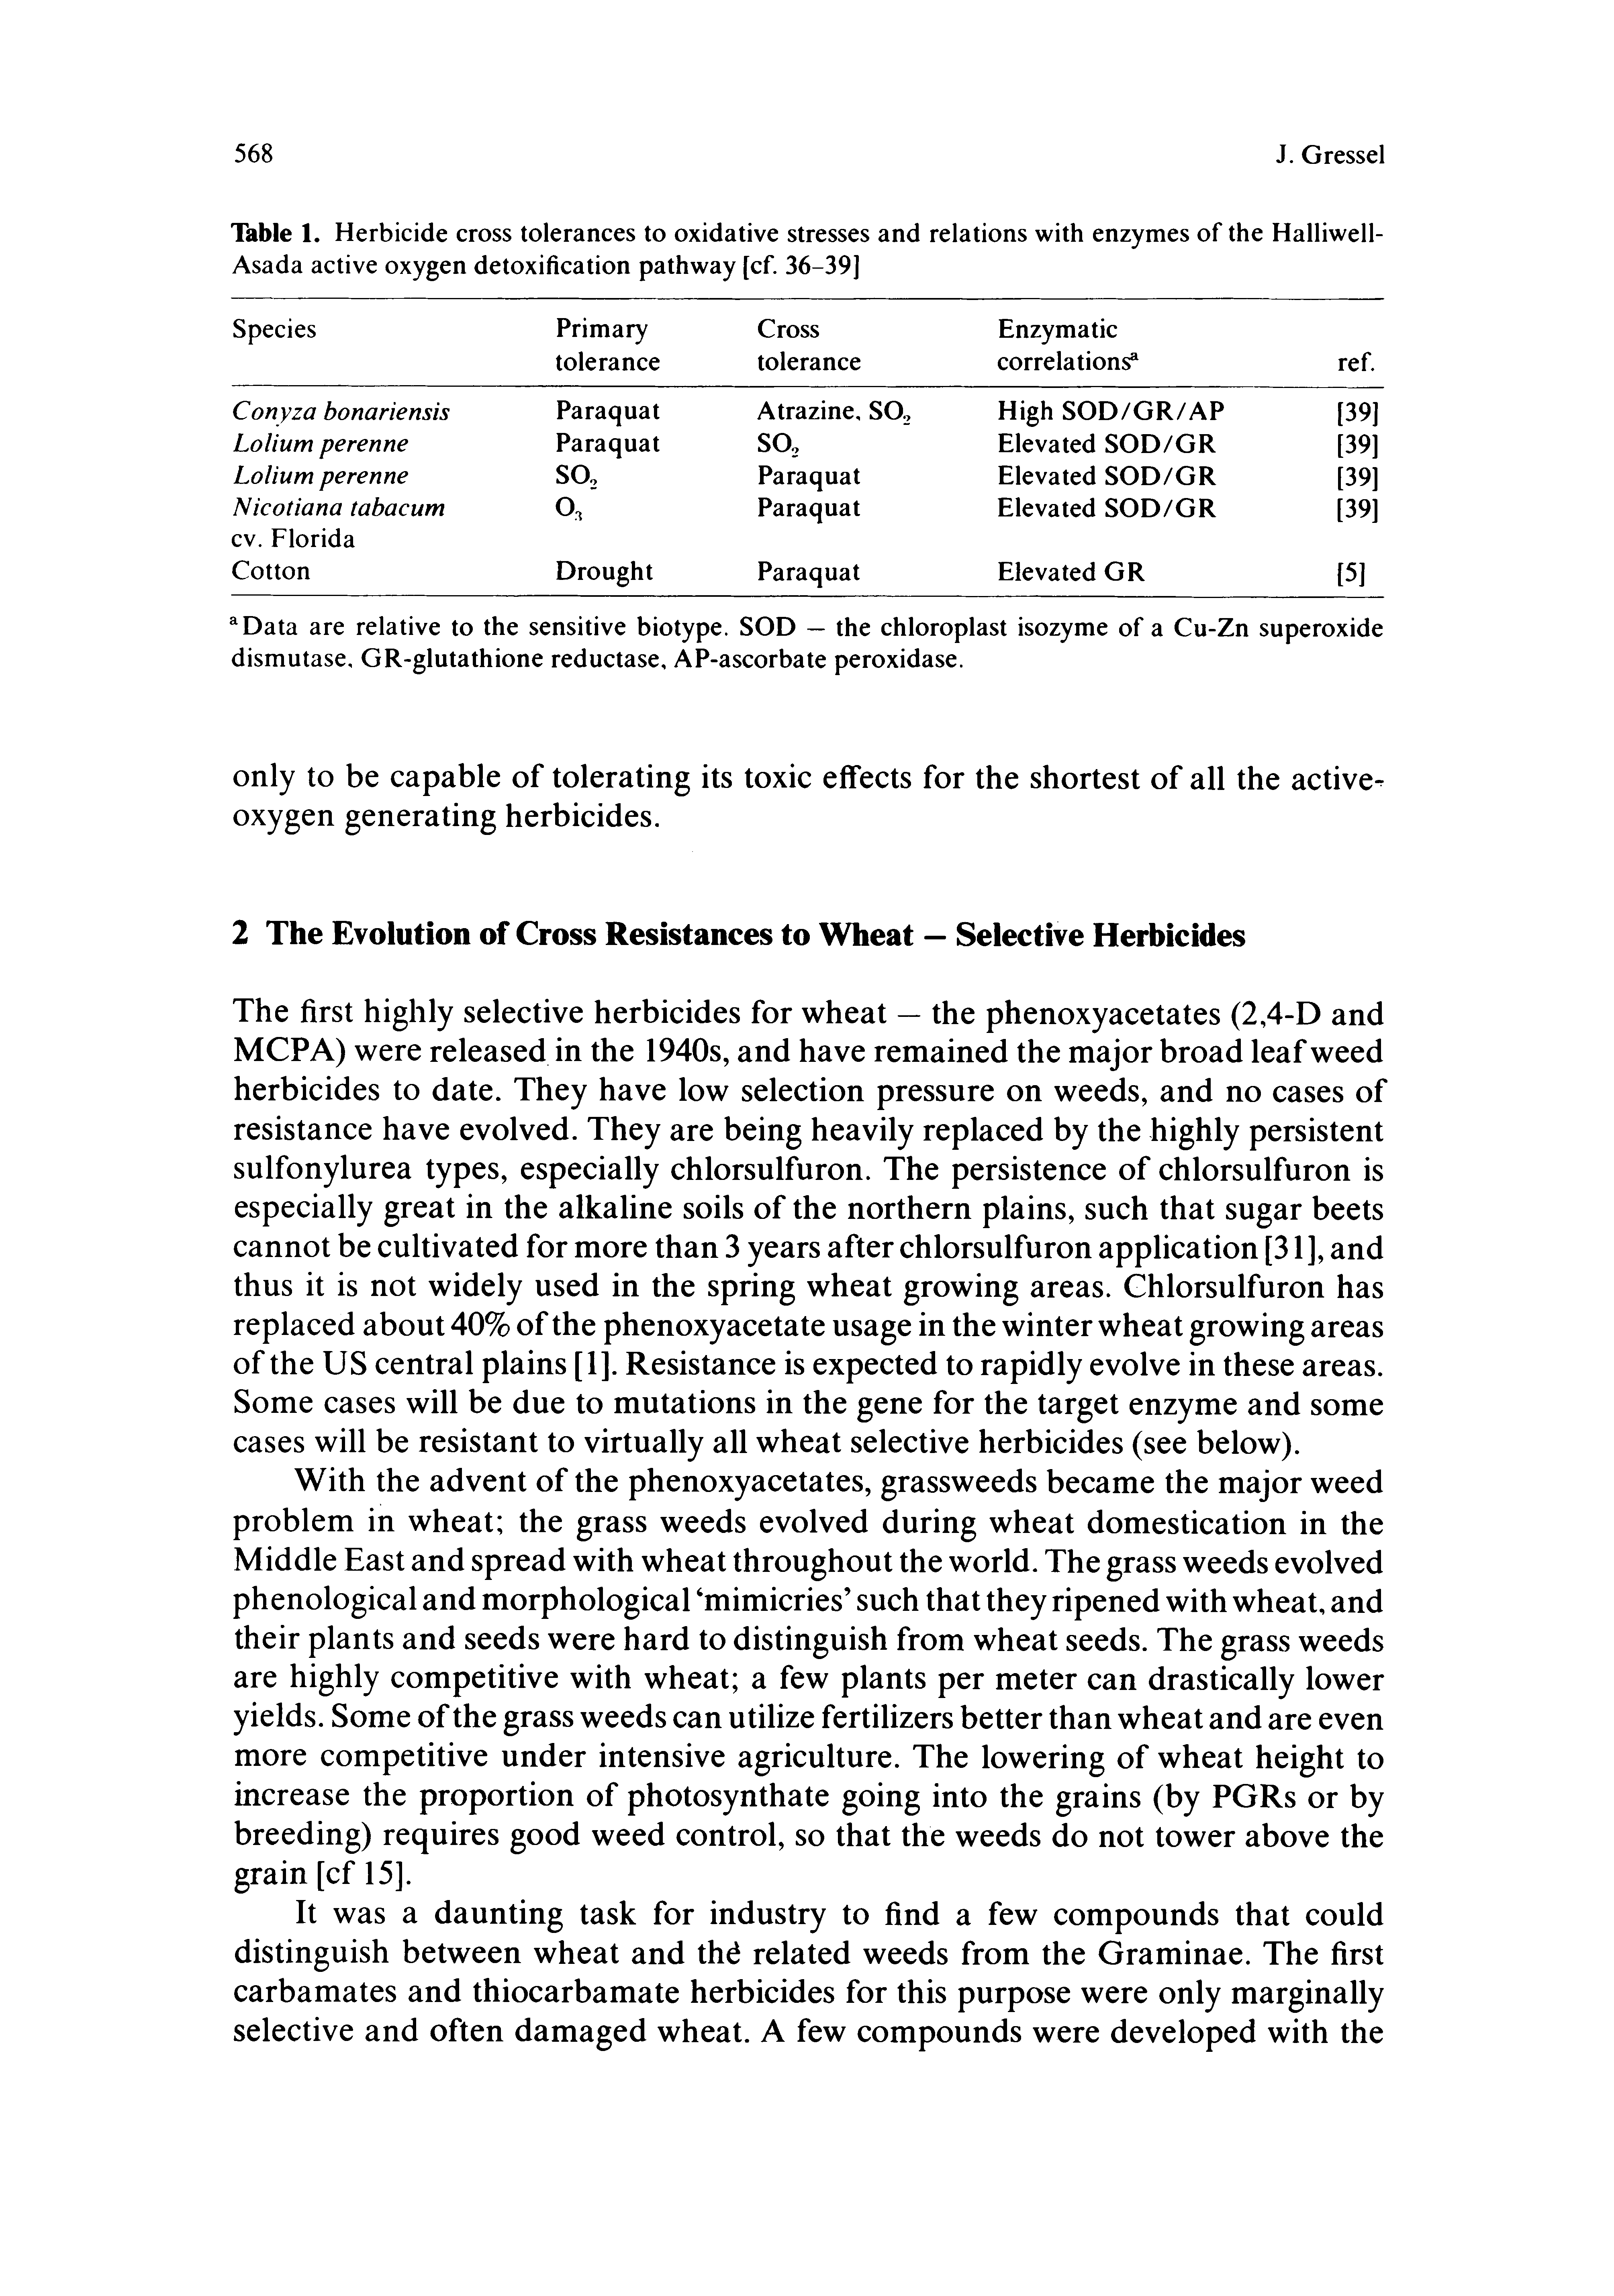 Table 1. Herbicide cross tolerances to oxidative stresses and relations with enzymes of the Halliwell-Asada active oxygen detoxification pathway [cf. 36-39]...